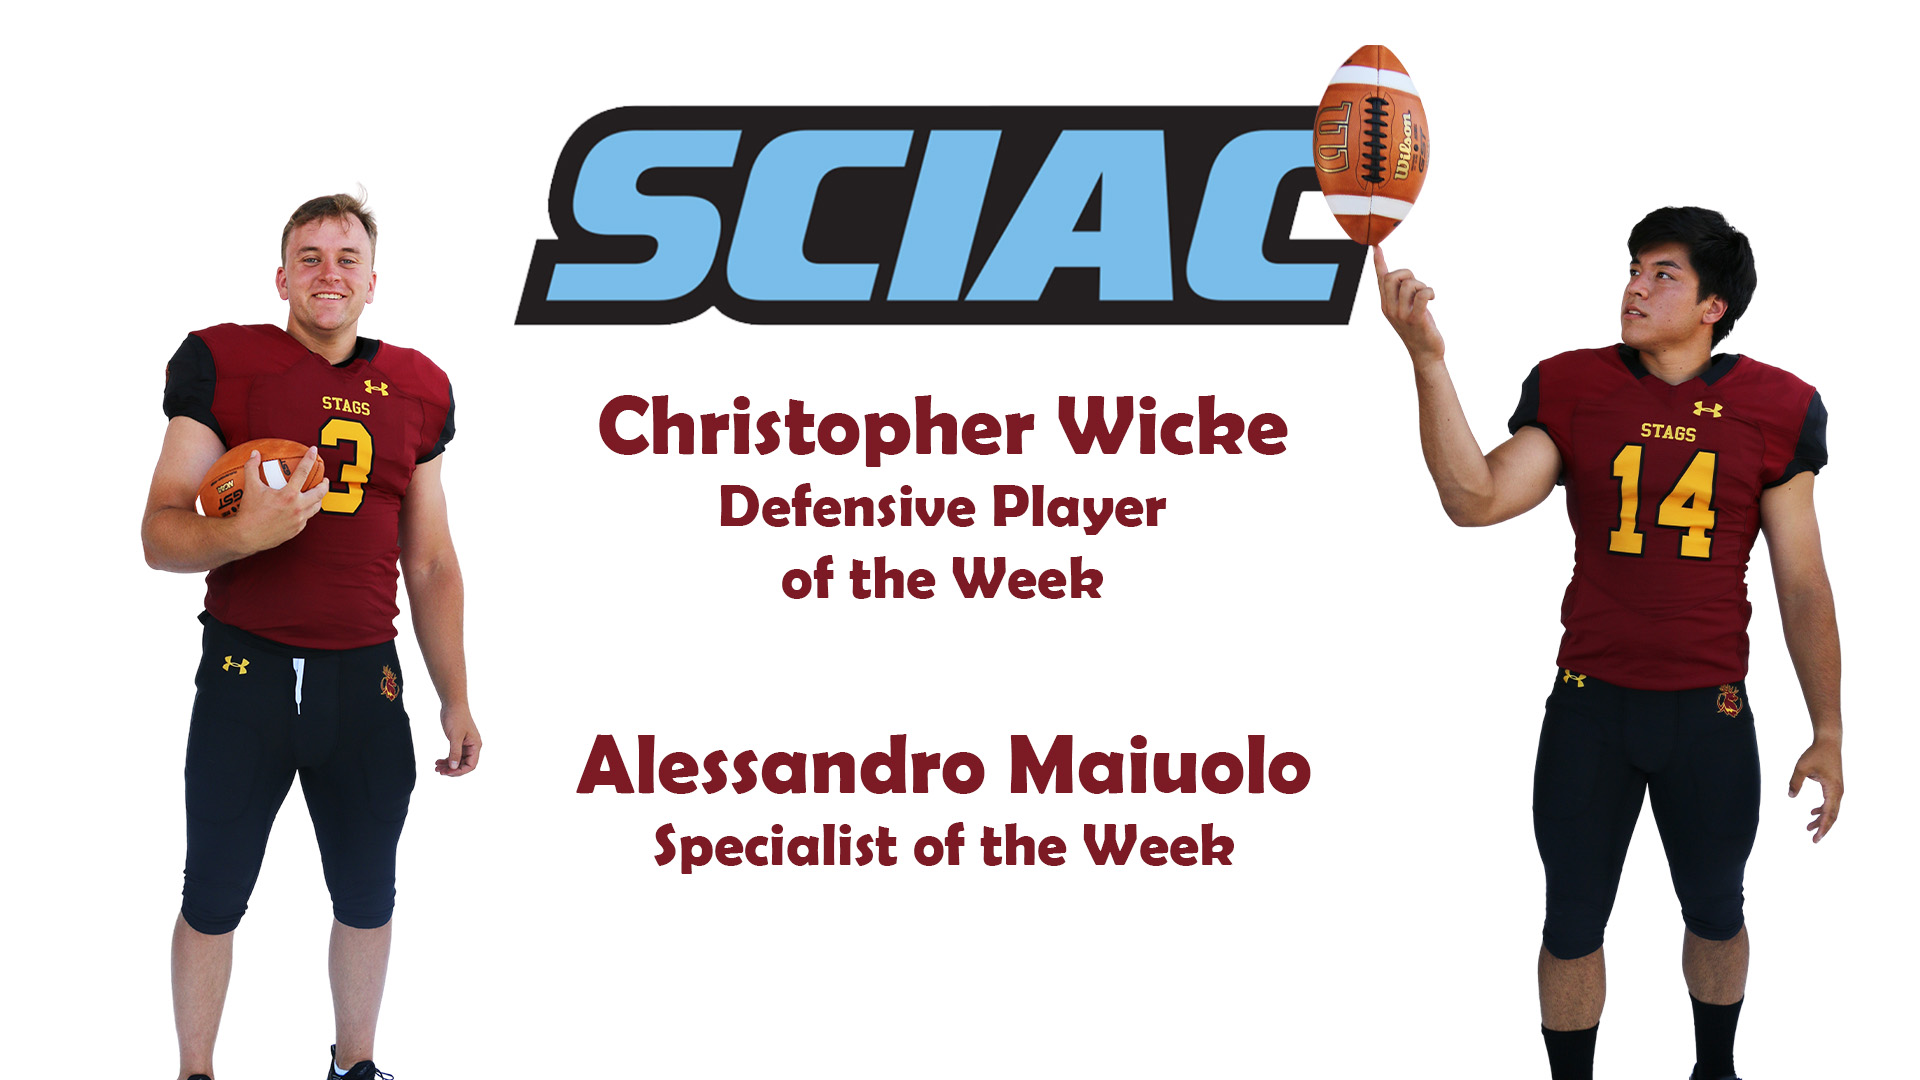 Christopher Wicke, Alessandro Maiuolo posed shots with the SCIAC logo